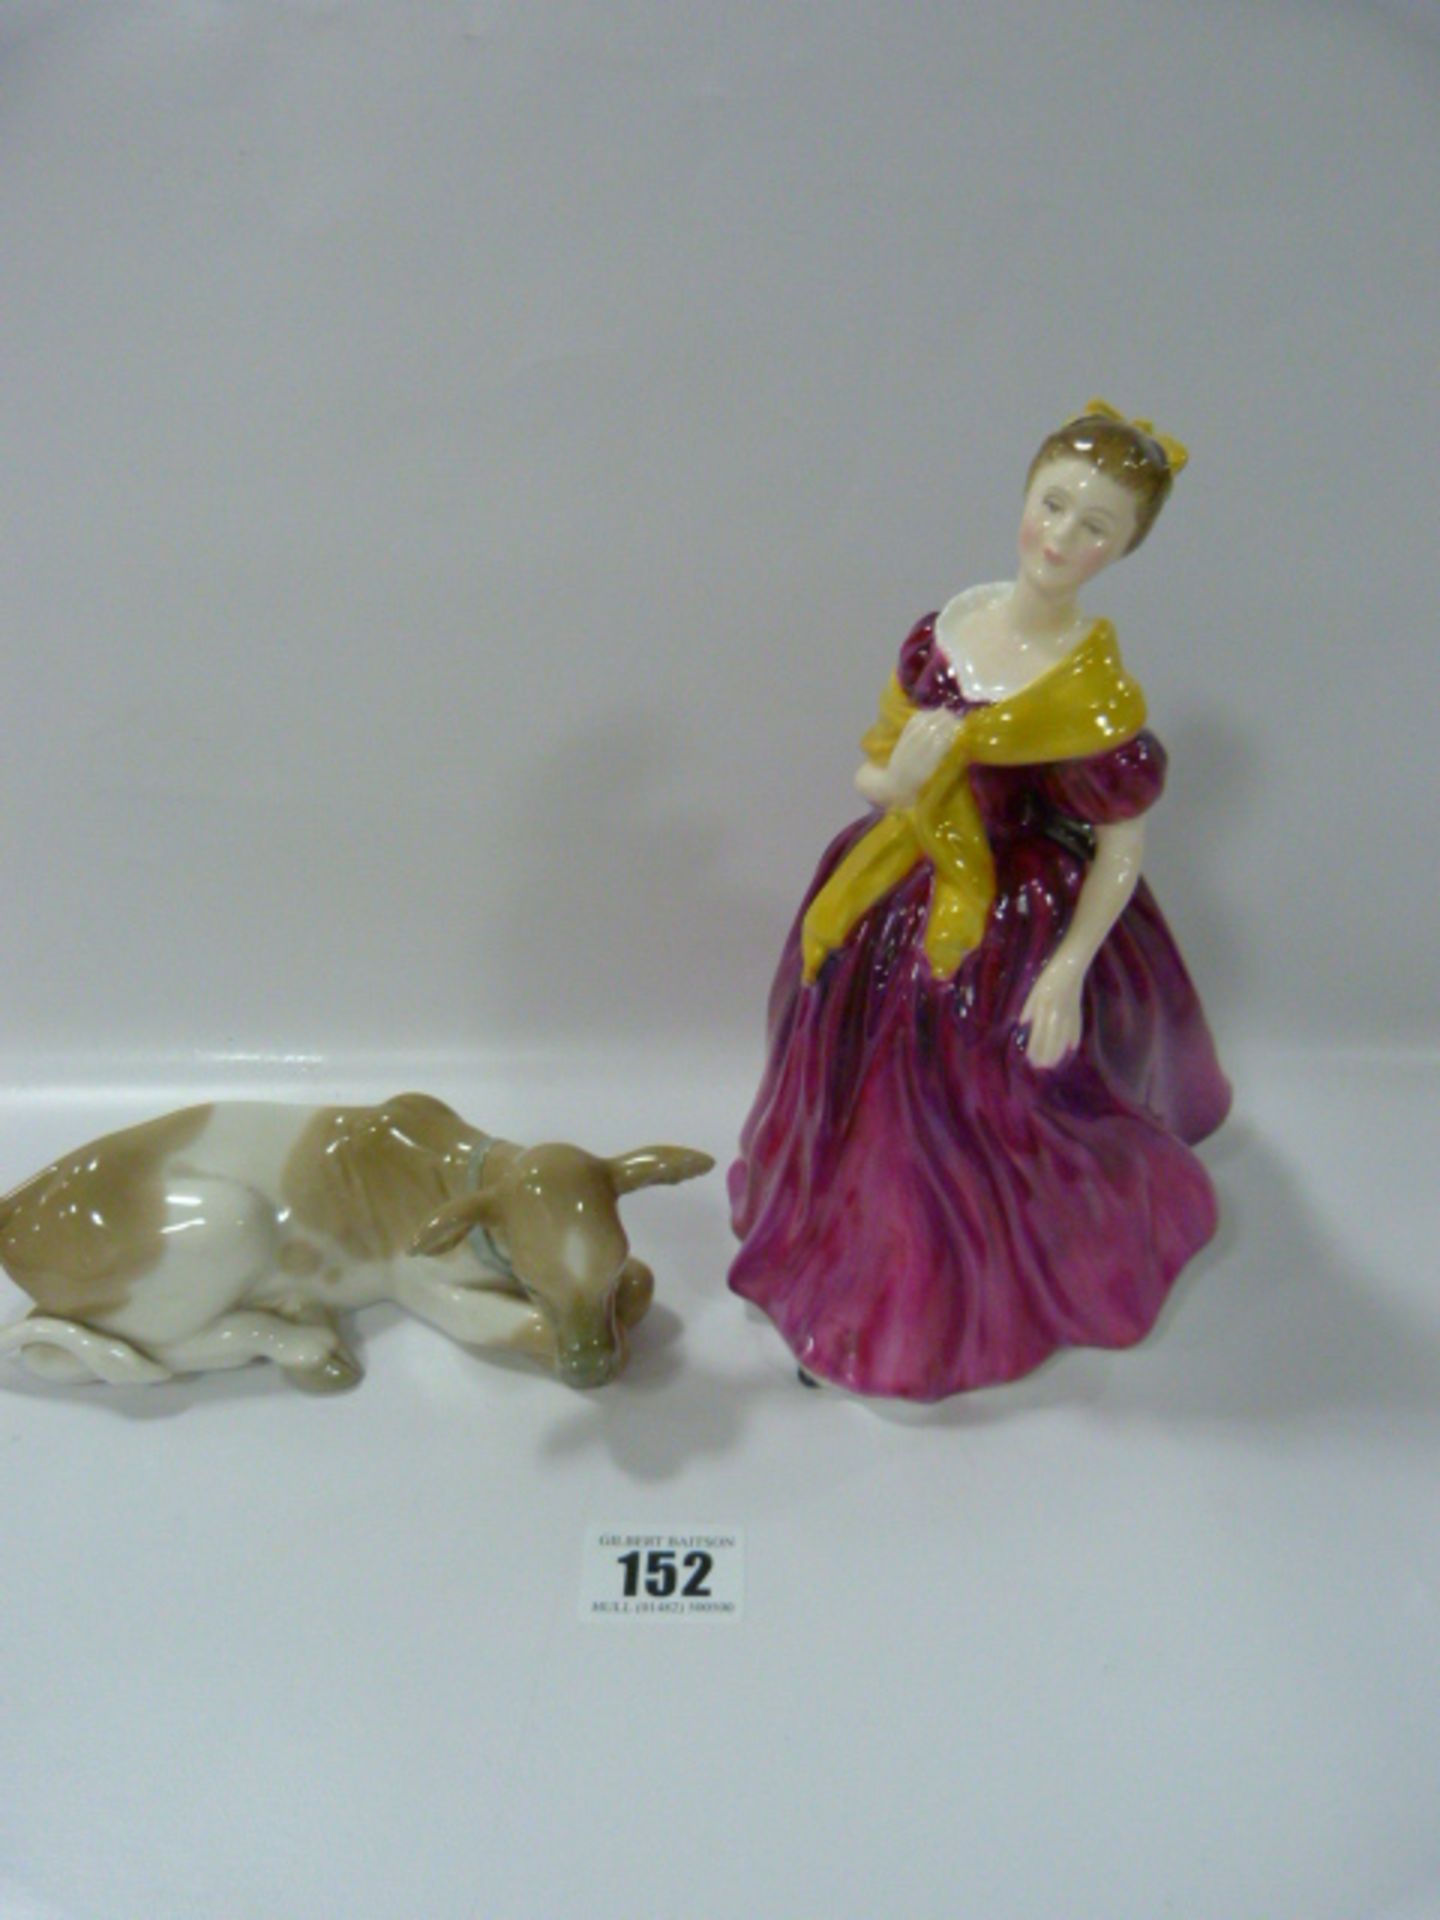 Lladro Nativity Cow & Royal Doulton Figurine Adrienne - Image 2 of 2